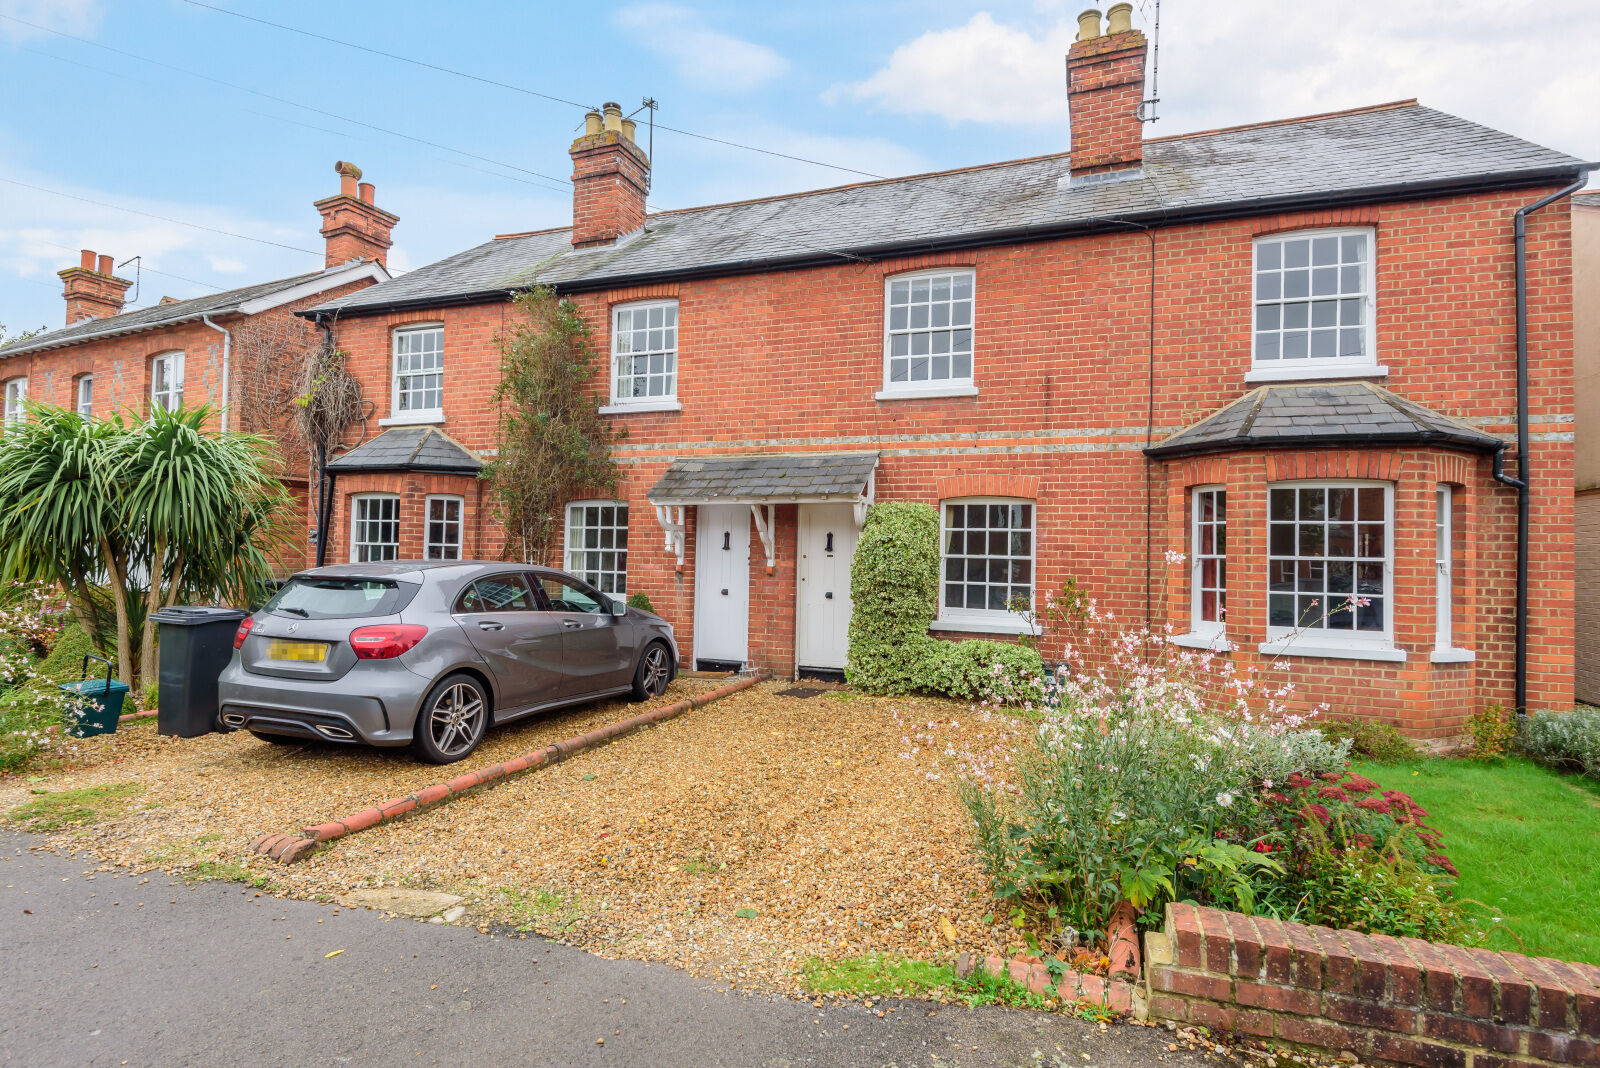 2 bedroom mid terraced house for sale Horseshoe Road, Pangbourne, RG8, main image